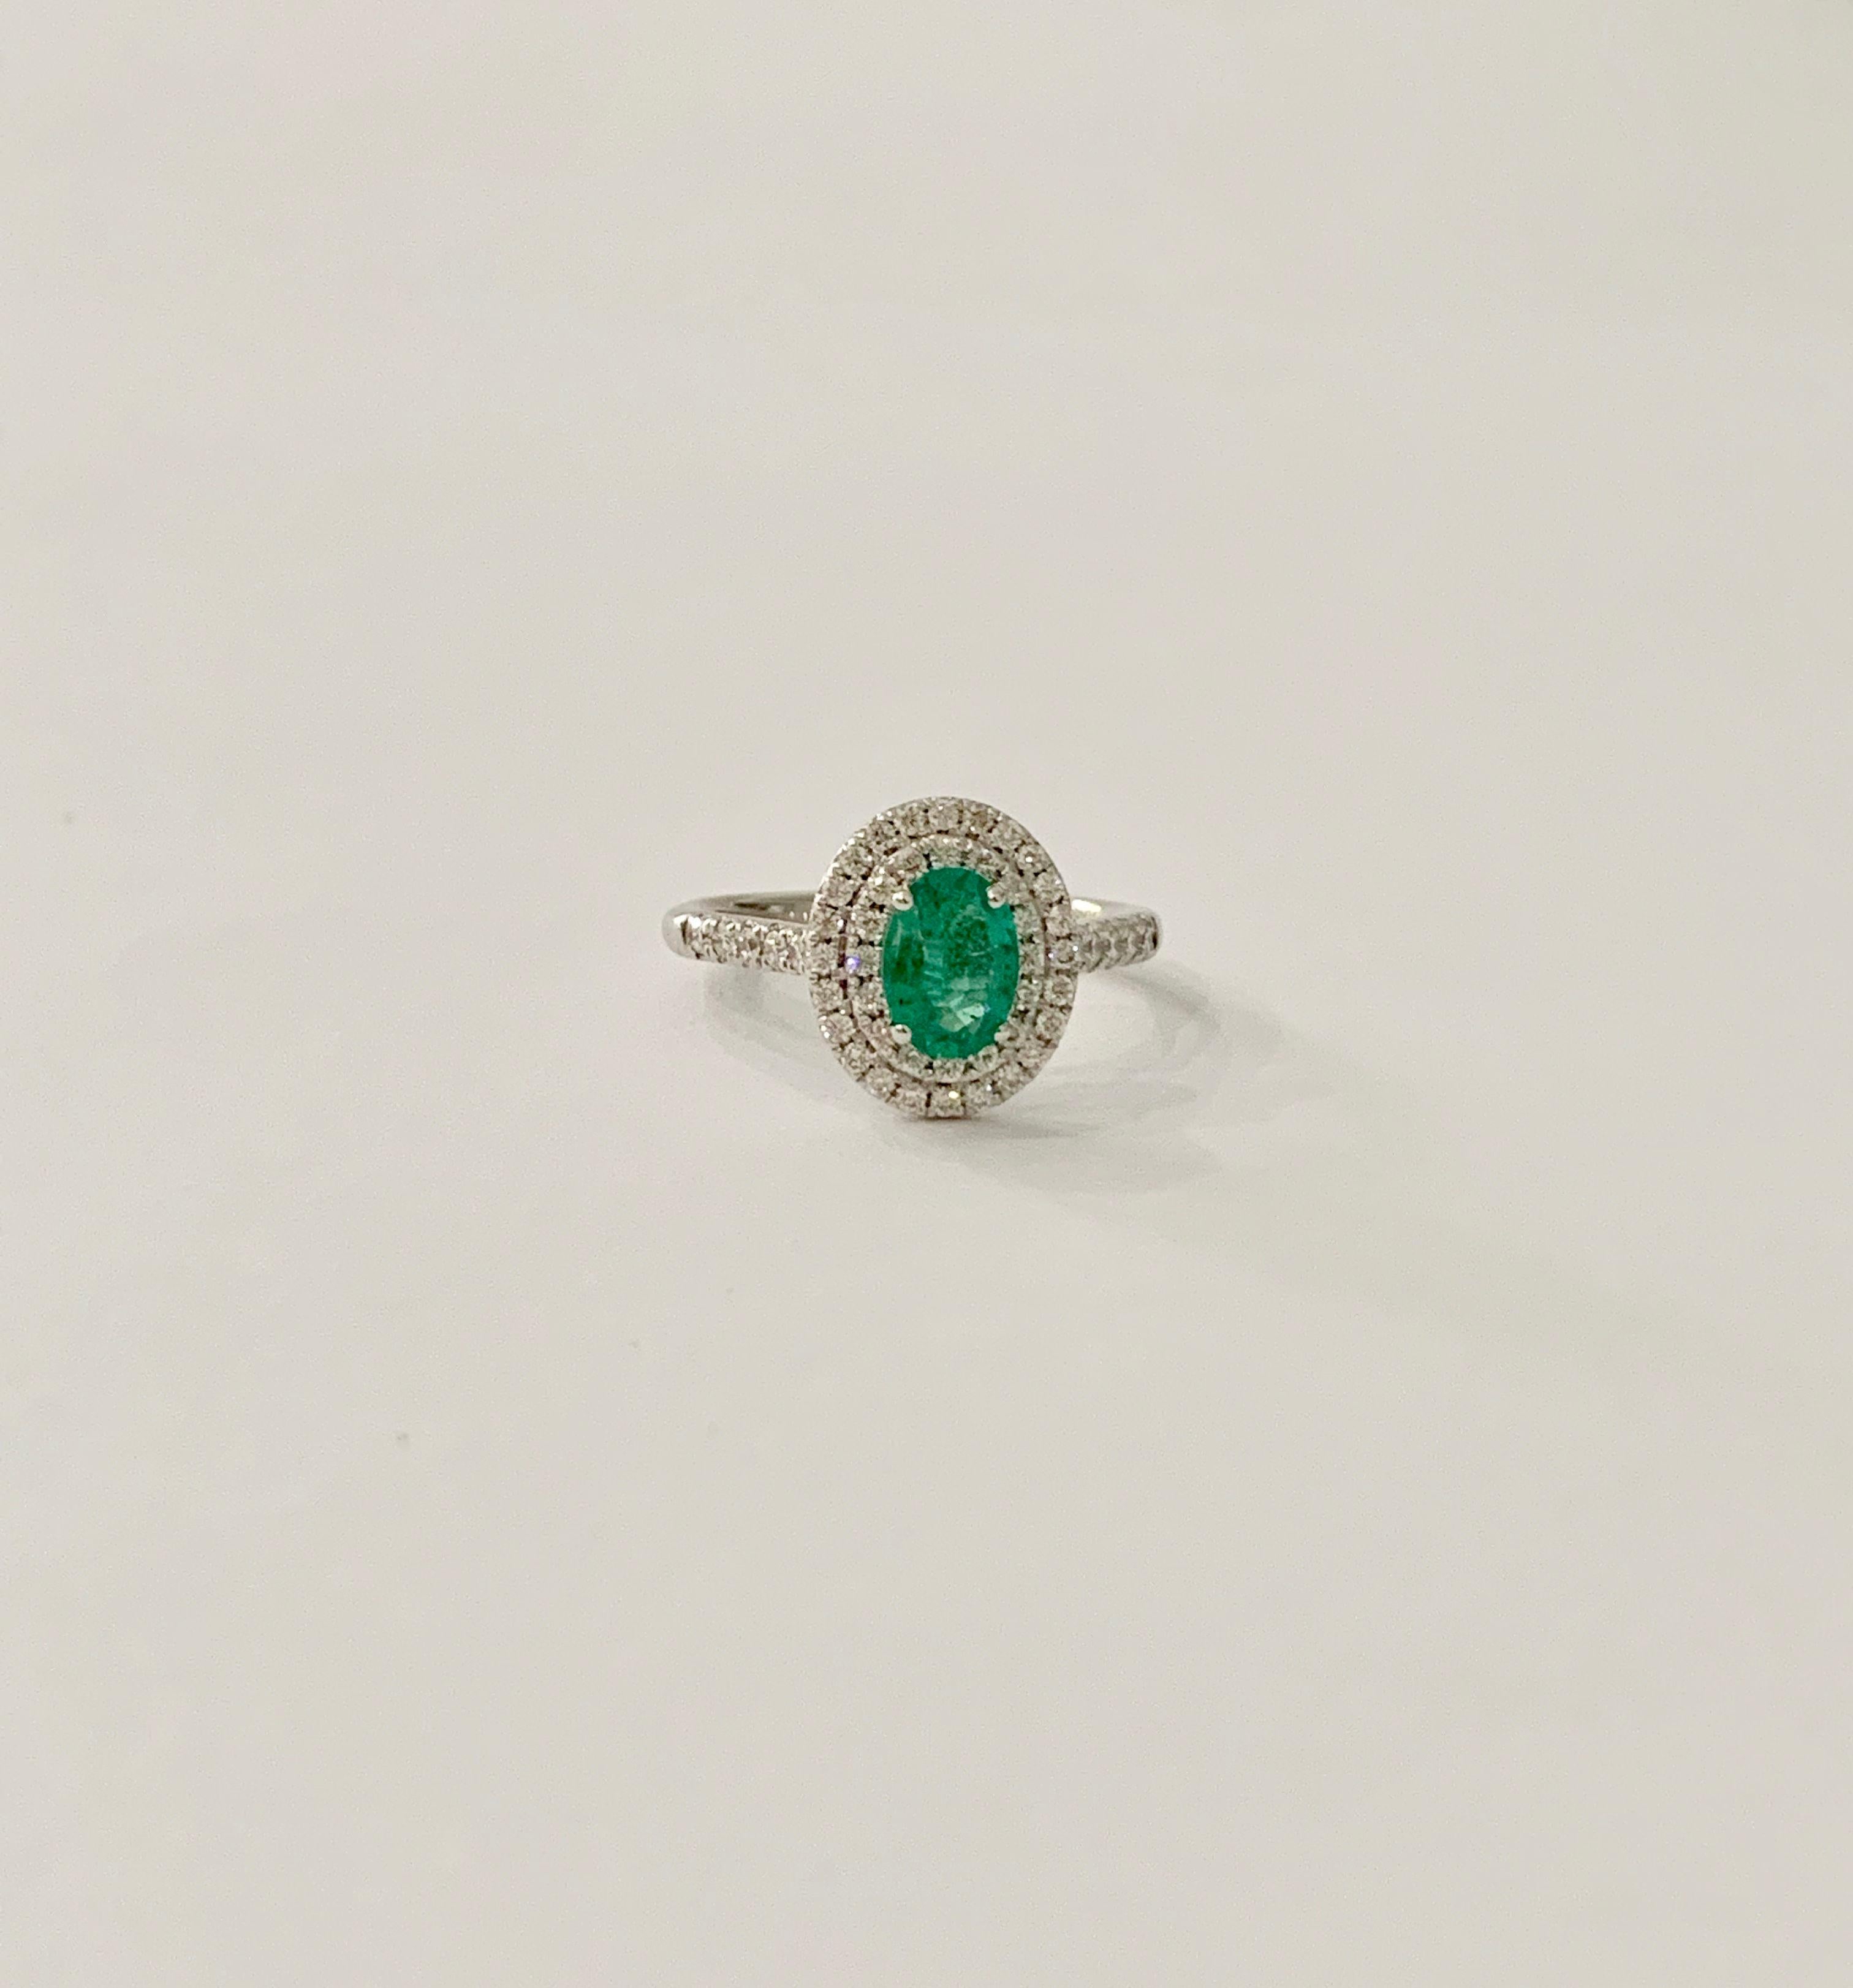 This stunning AAAA Oval Emerald is of a bright green colour which is set off spectacularly by the double halo of diamonds.  The ring could make an amazing Engagement ring but would just as well make a beautiful Cocktail RIng.  The 0.66ct Emerald